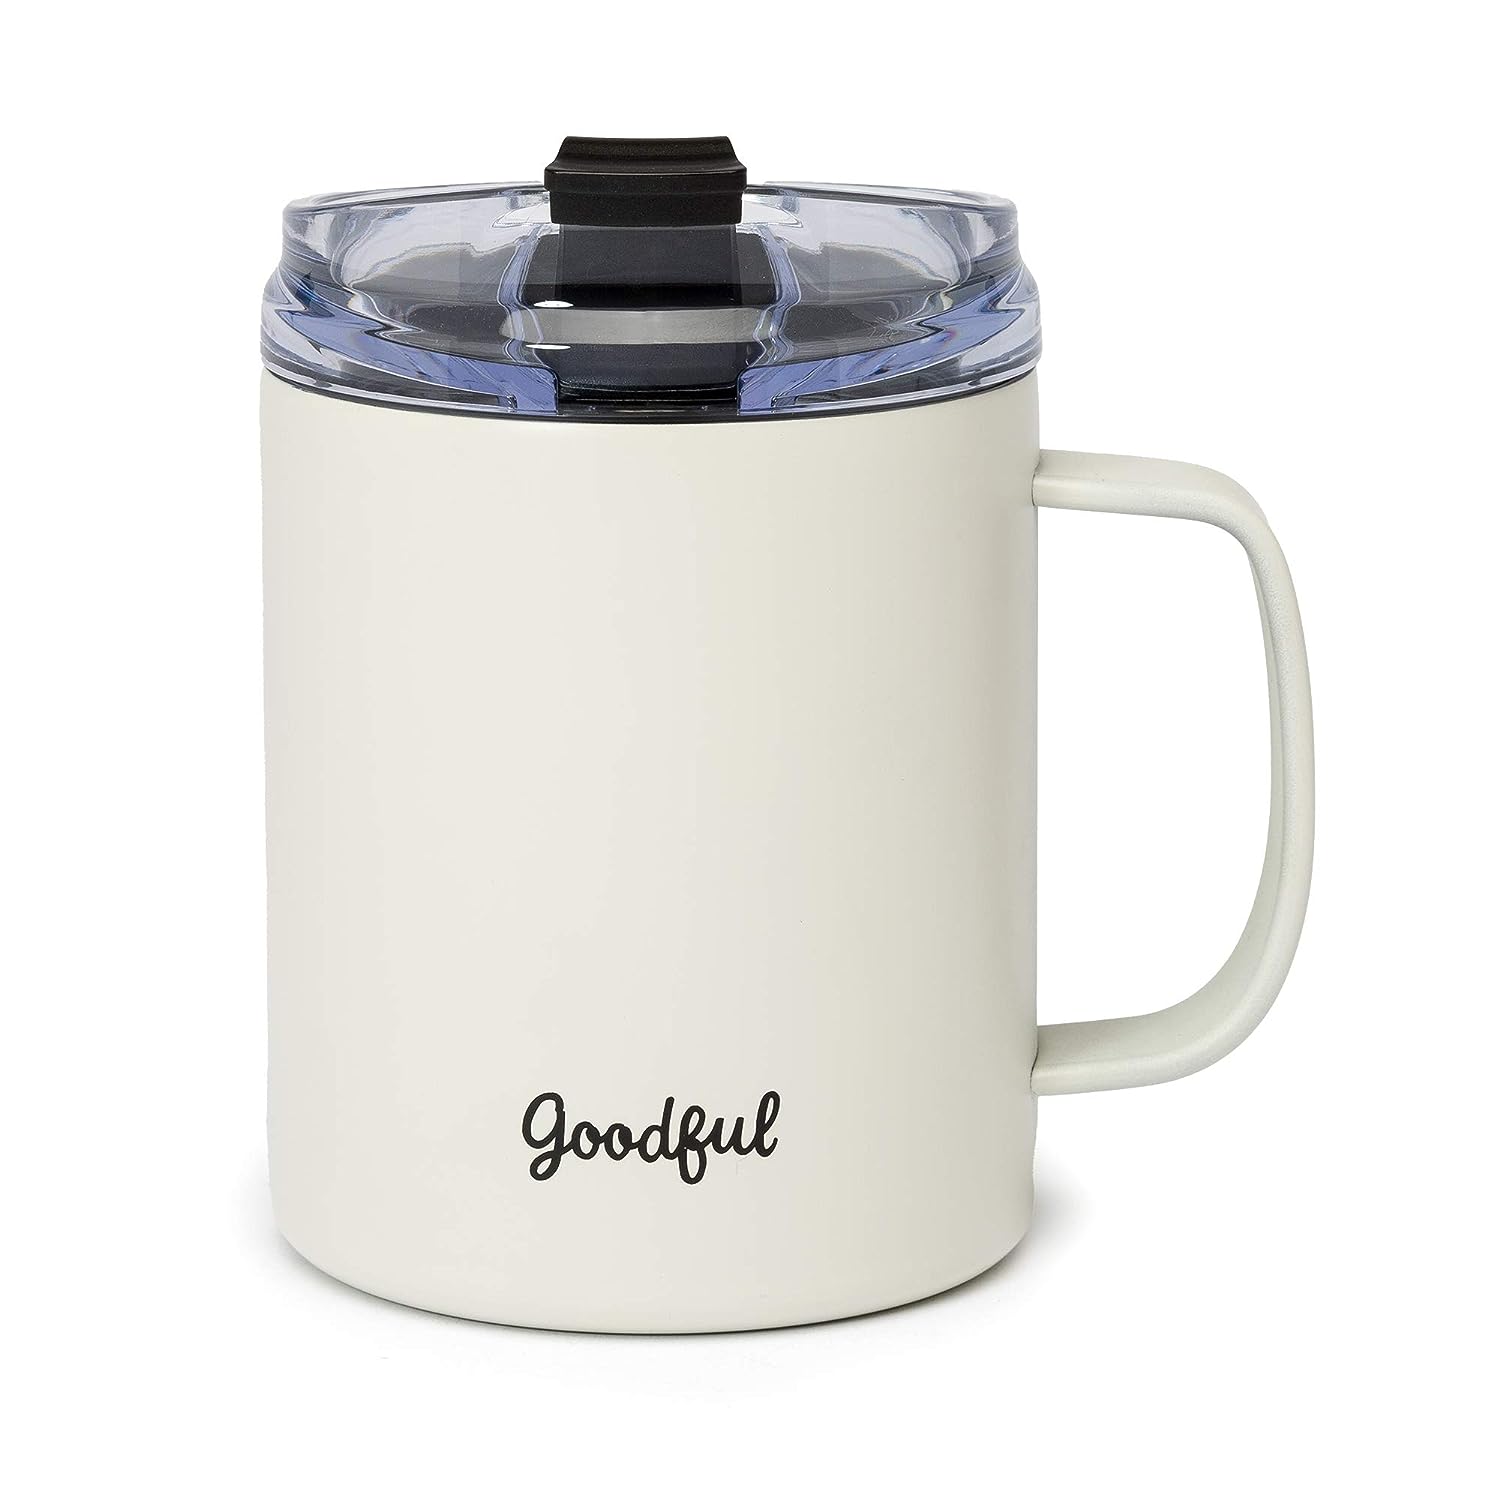 *BACK* 14-Oz Goodful Stainless Steel Insulated Double Wall Vacuum Sealed Mug w/ Lid $7.75 + Free S&H w/ Prime or $25+